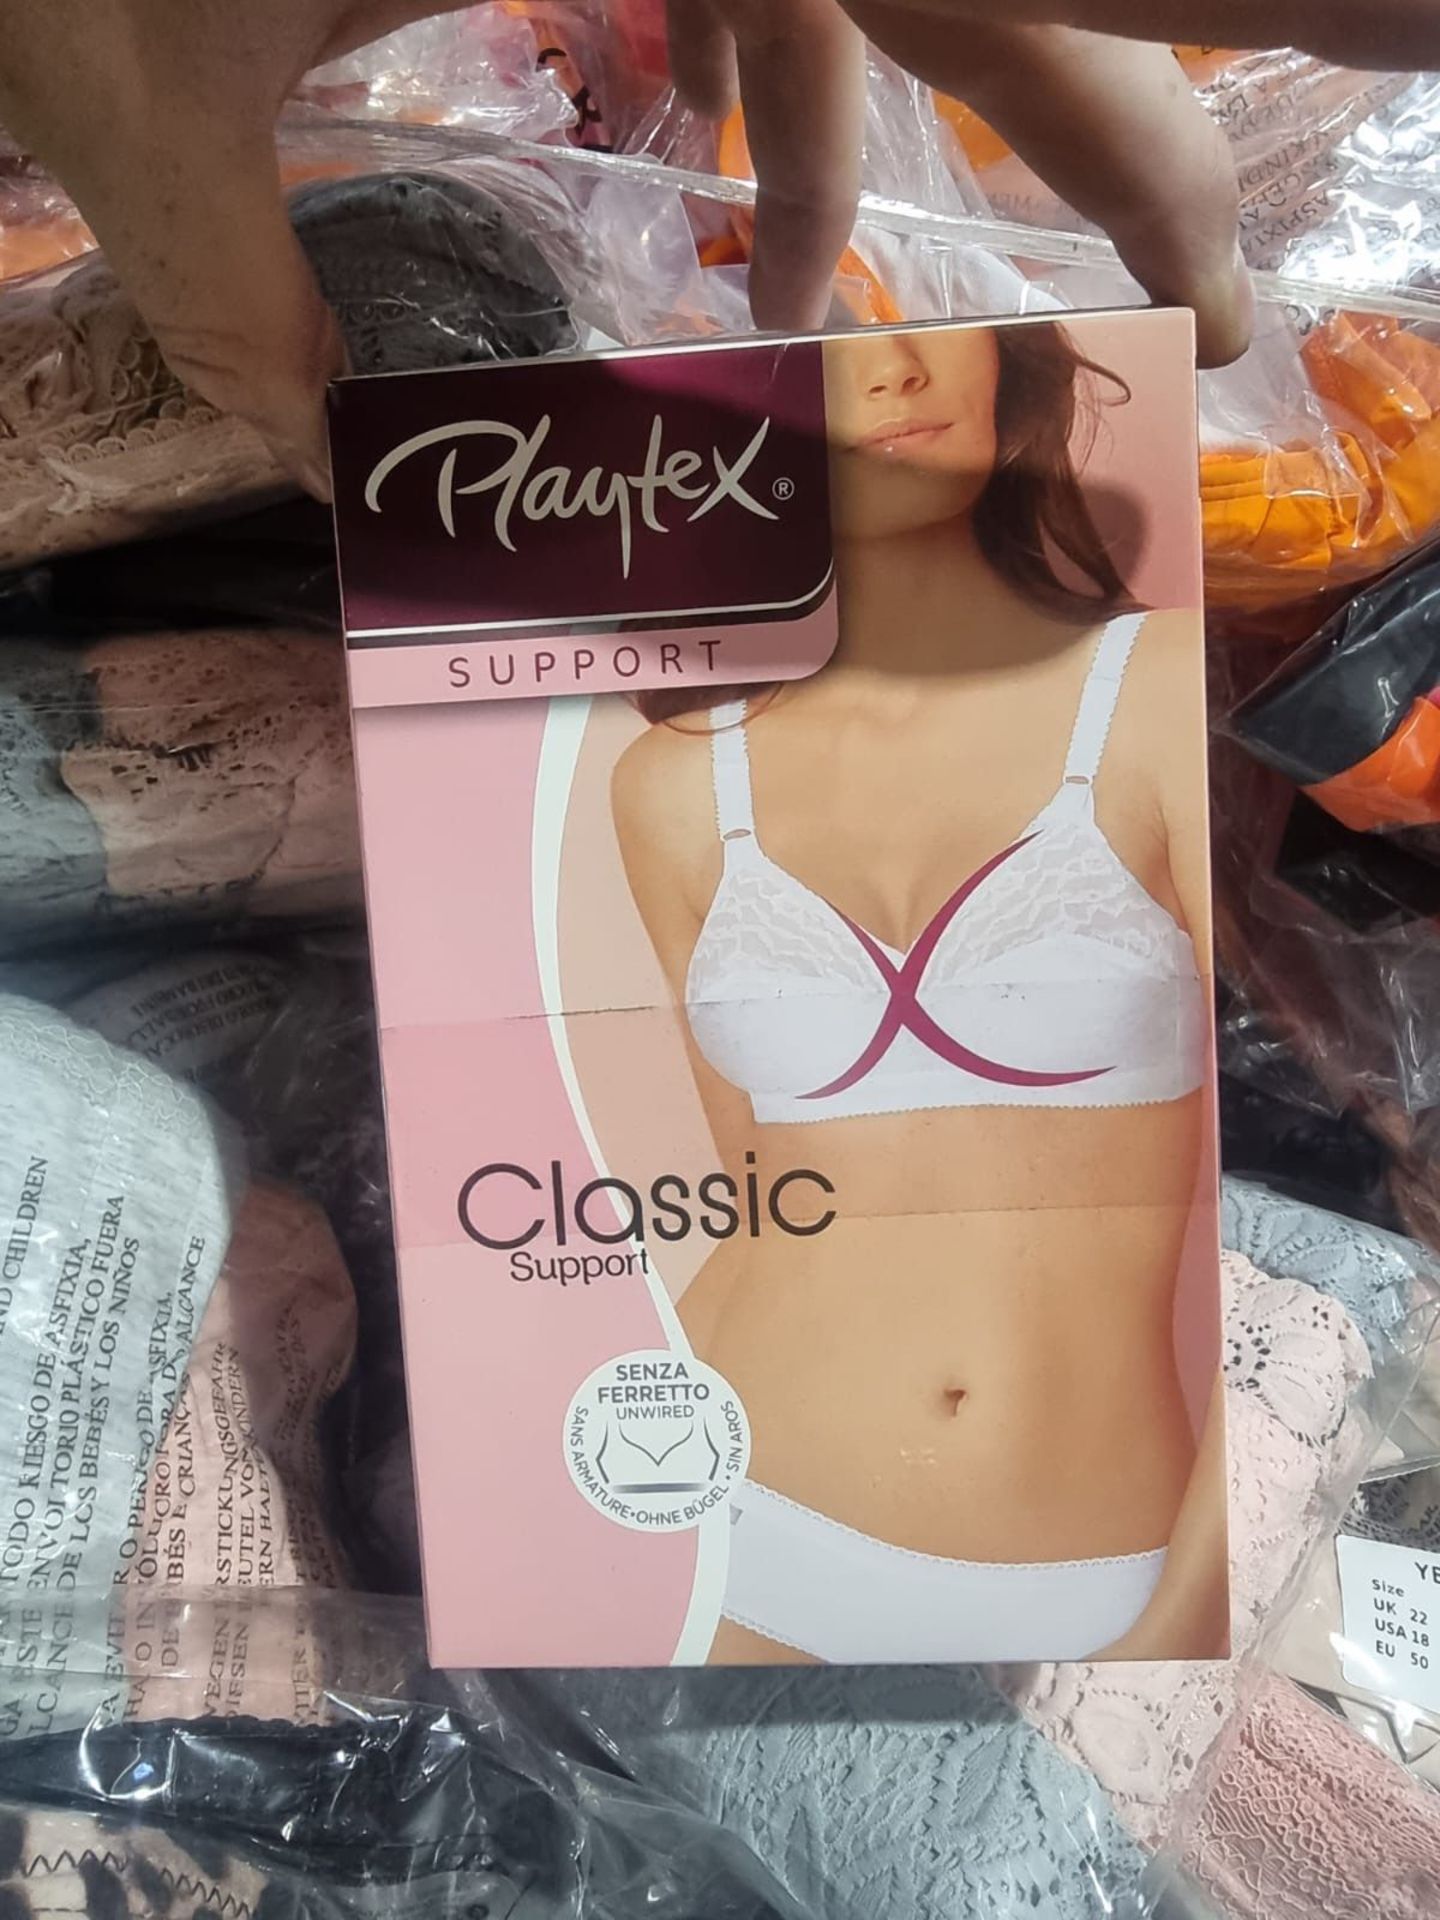 100 x NEW PACKAGED ASSORTED SWIM & UNDERWEAR FROM BRAND SUCH AS WONDERBRA, BOUX AVENUE, ANN SUMMERS, - Image 53 of 53